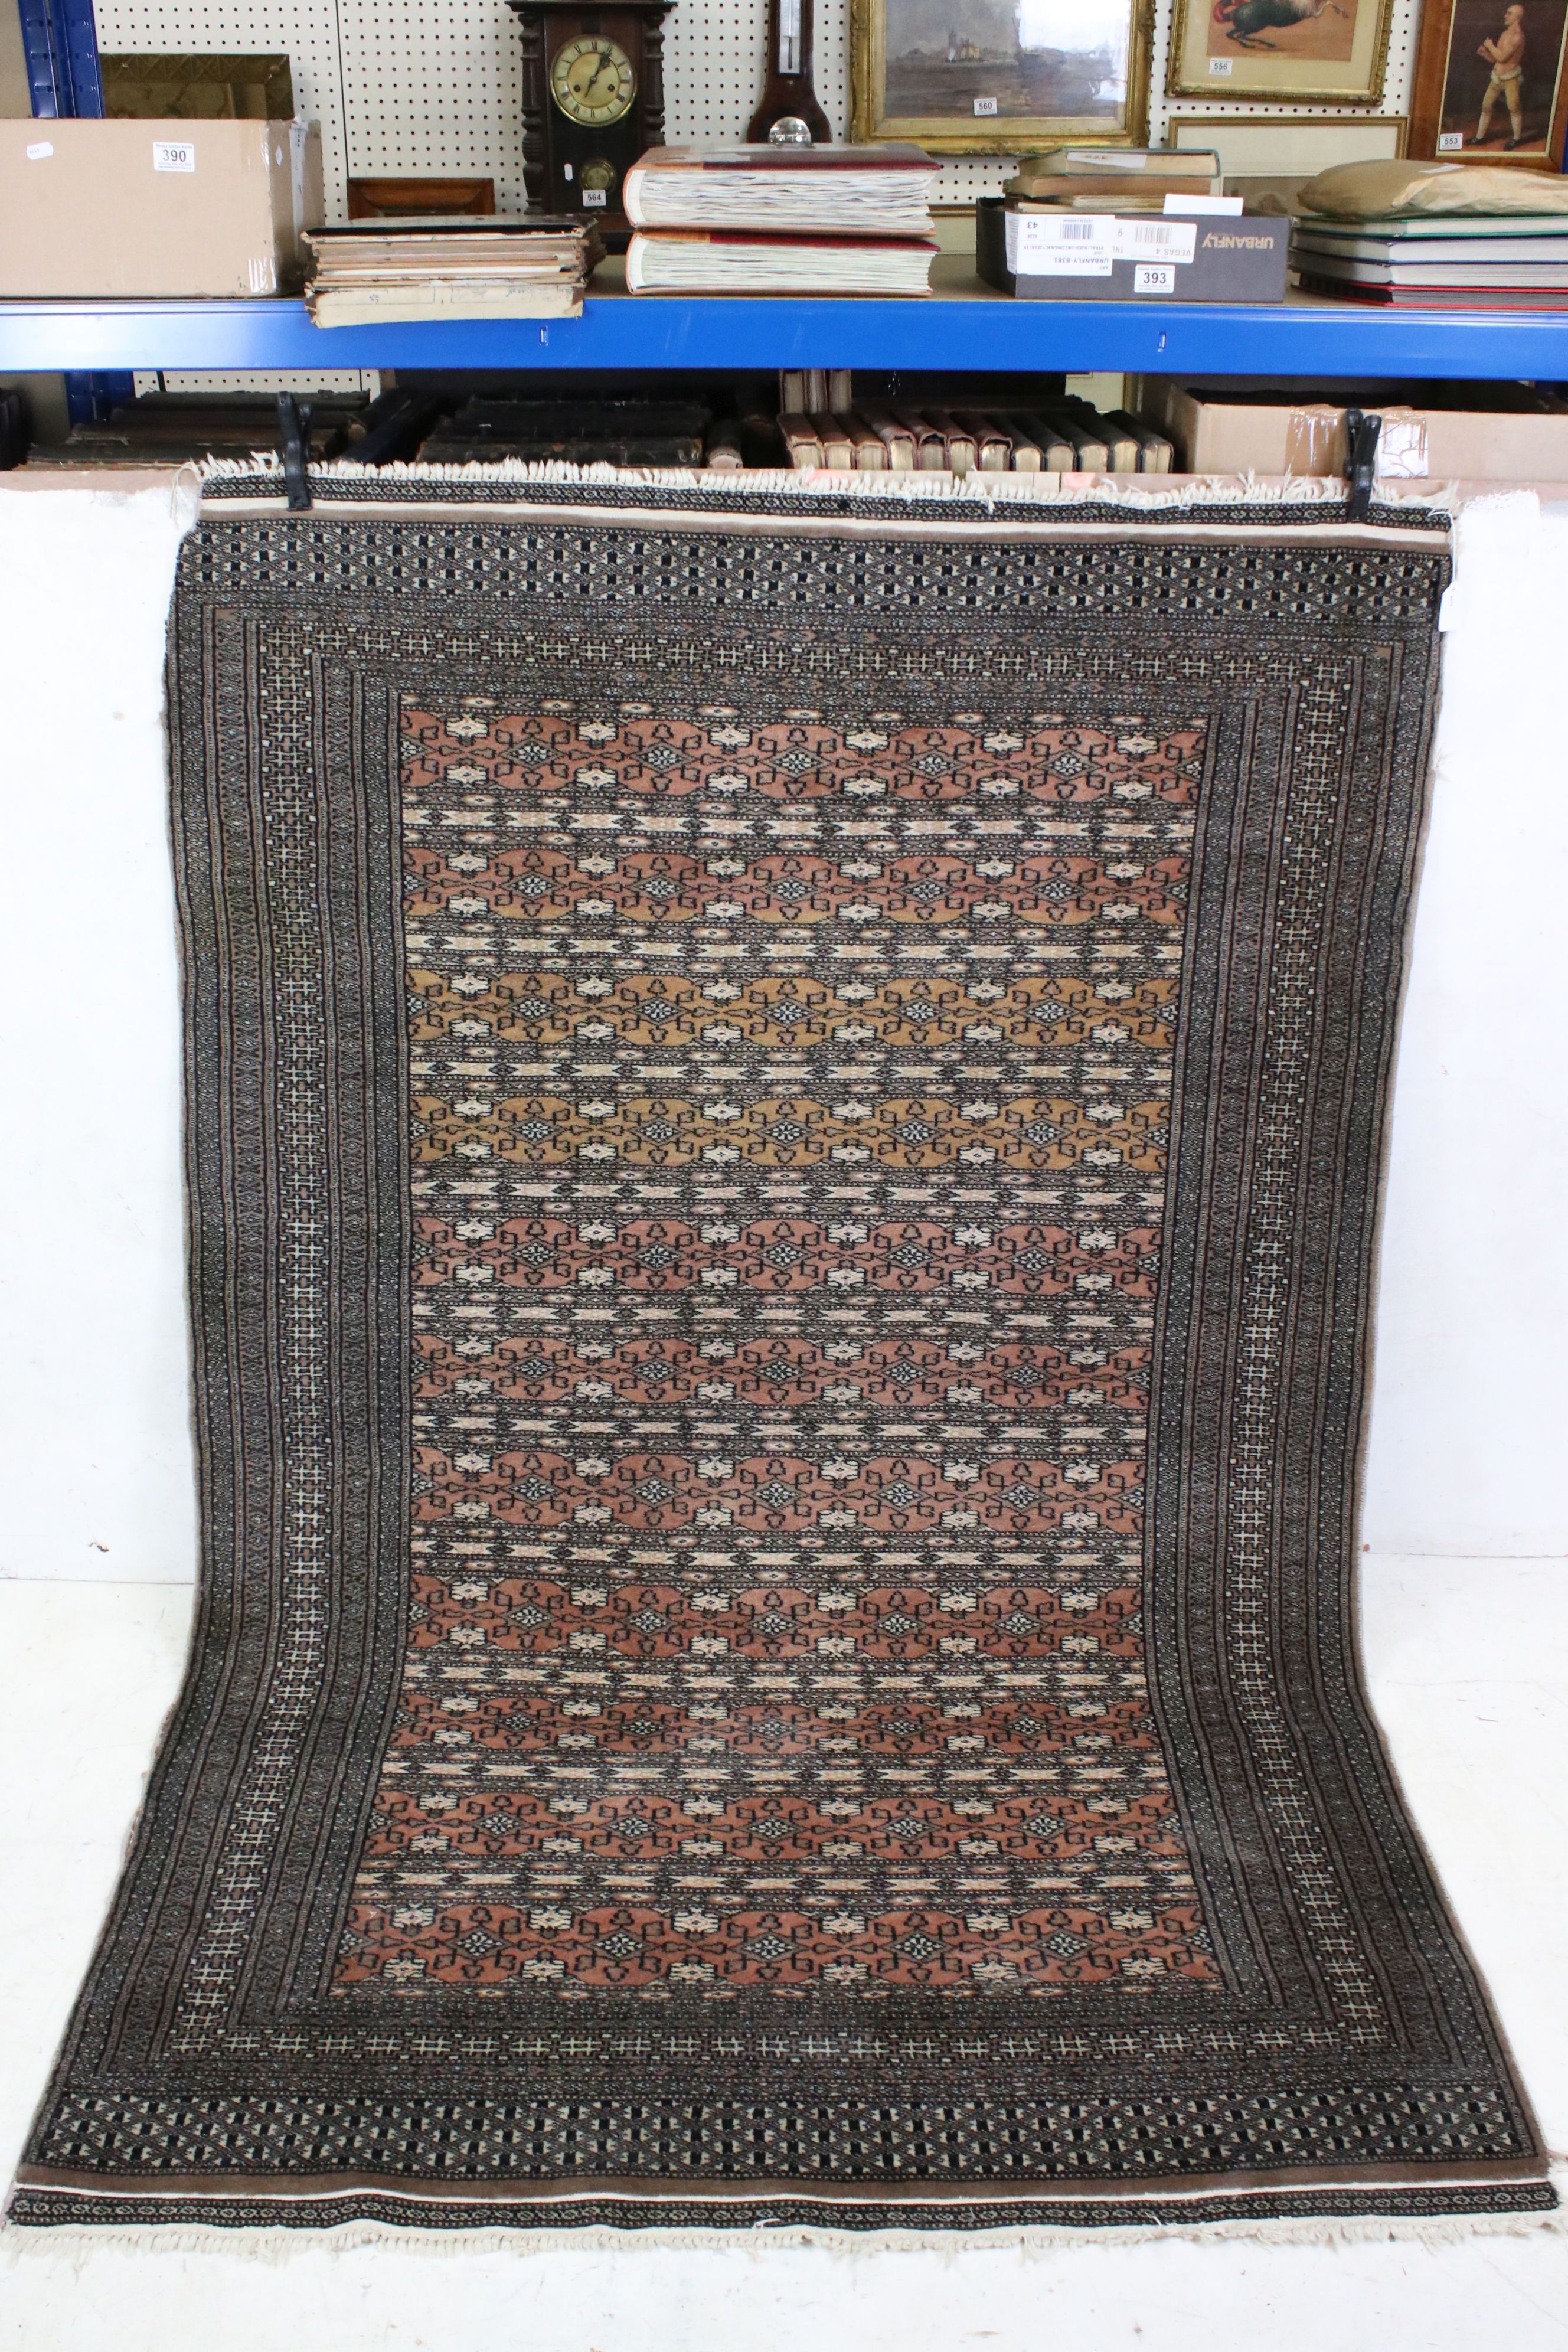 Eastern Grey and Red Ground Wool Rug with rows of geometric pattern, approx. 197cm x 126cm